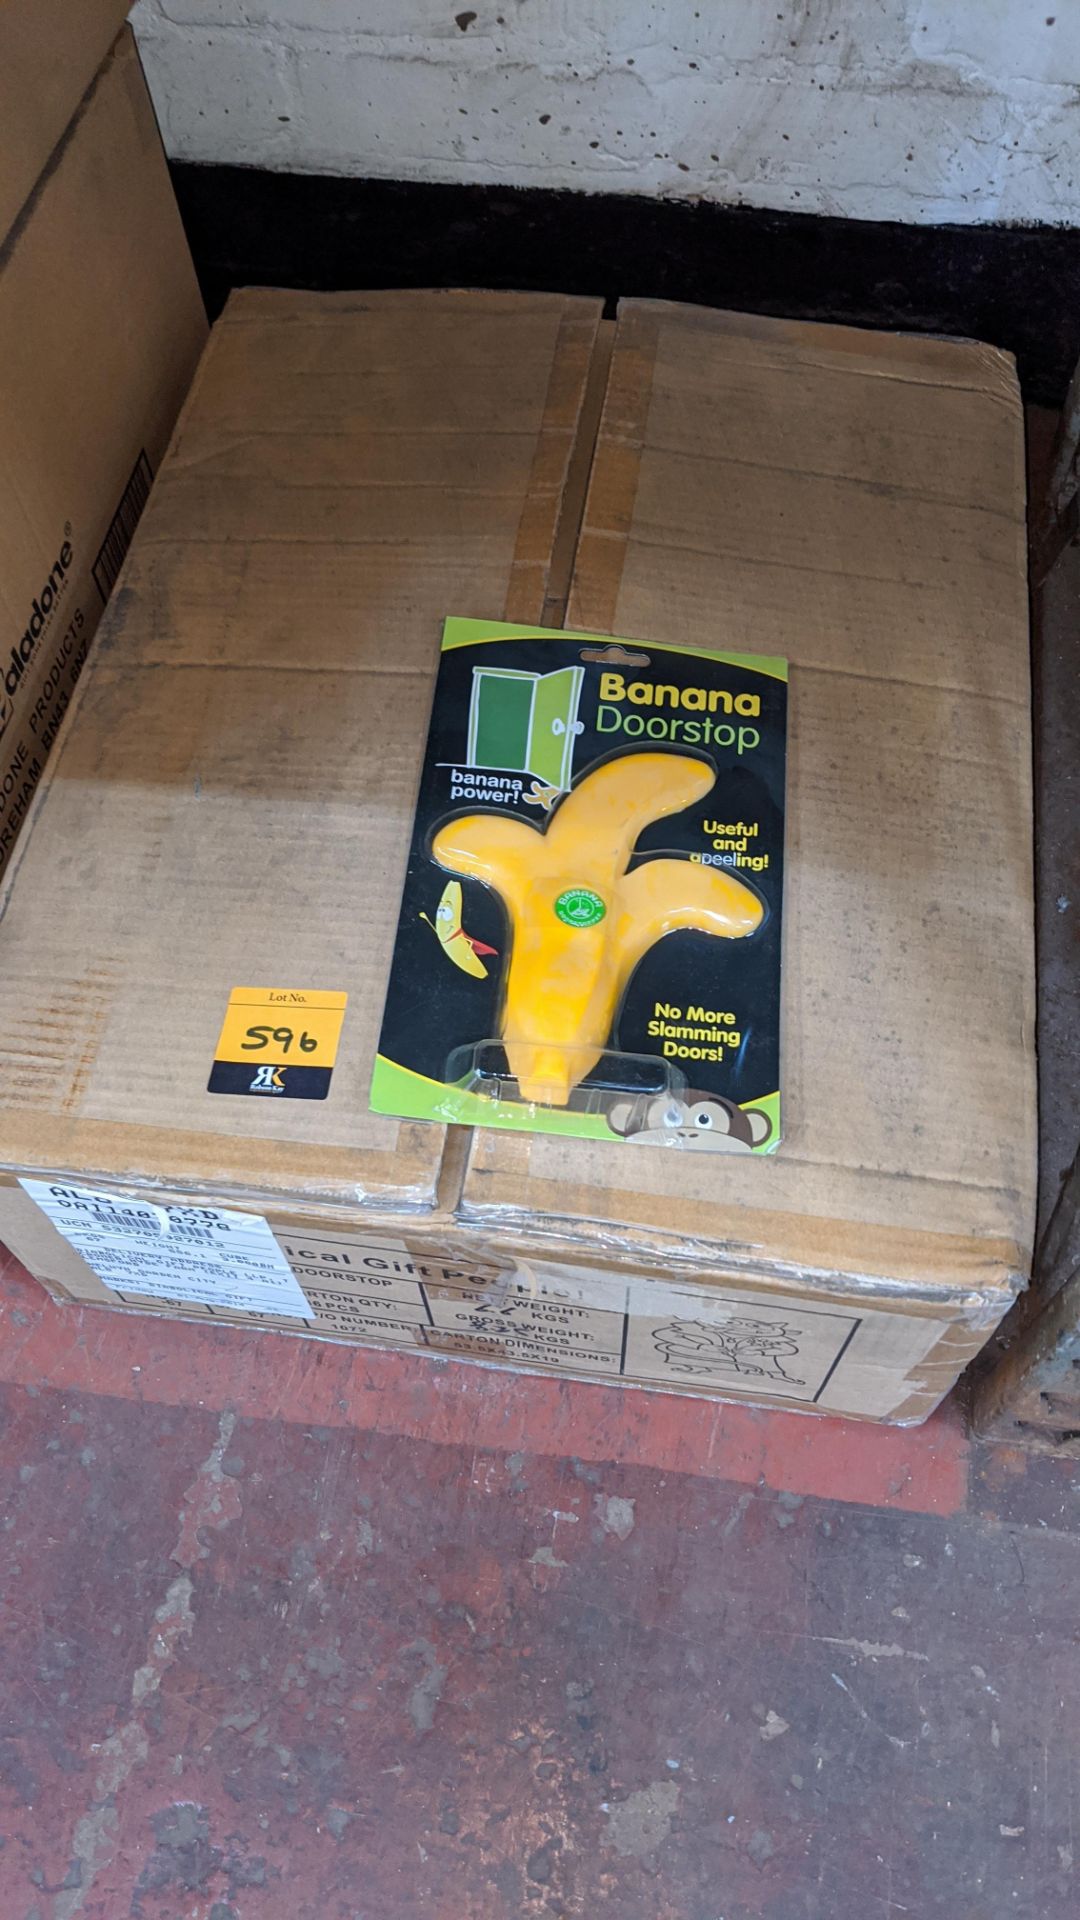 36 off banana doorstops - one carton containing 6 smaller boxes, each with 6 individually packeted d